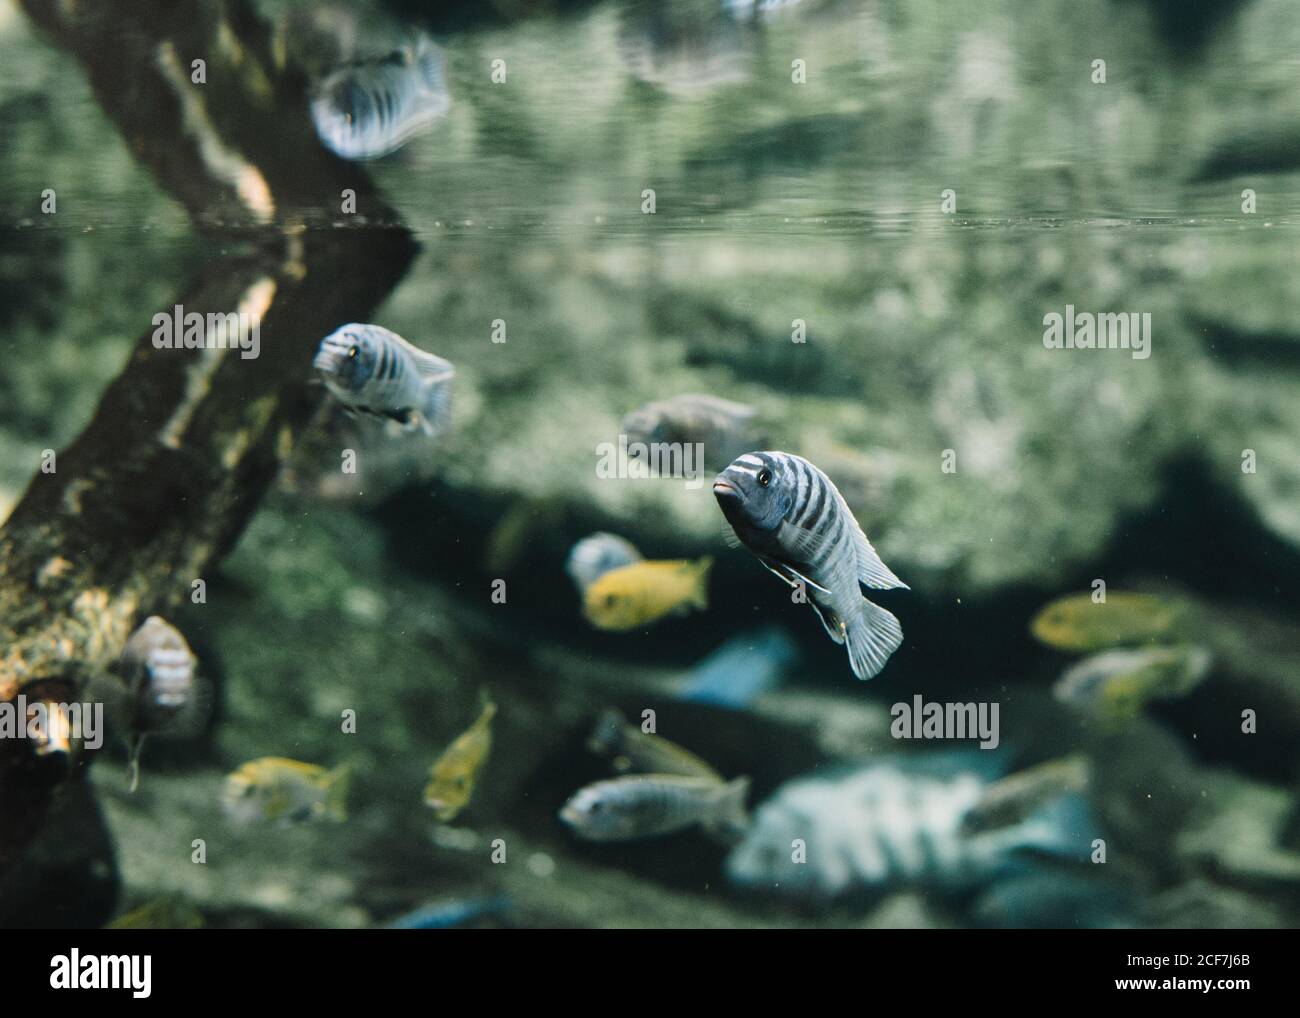 Small flock of blue and yellow striped small fishes near surface of water in aquarium on blurred background Stock Photo